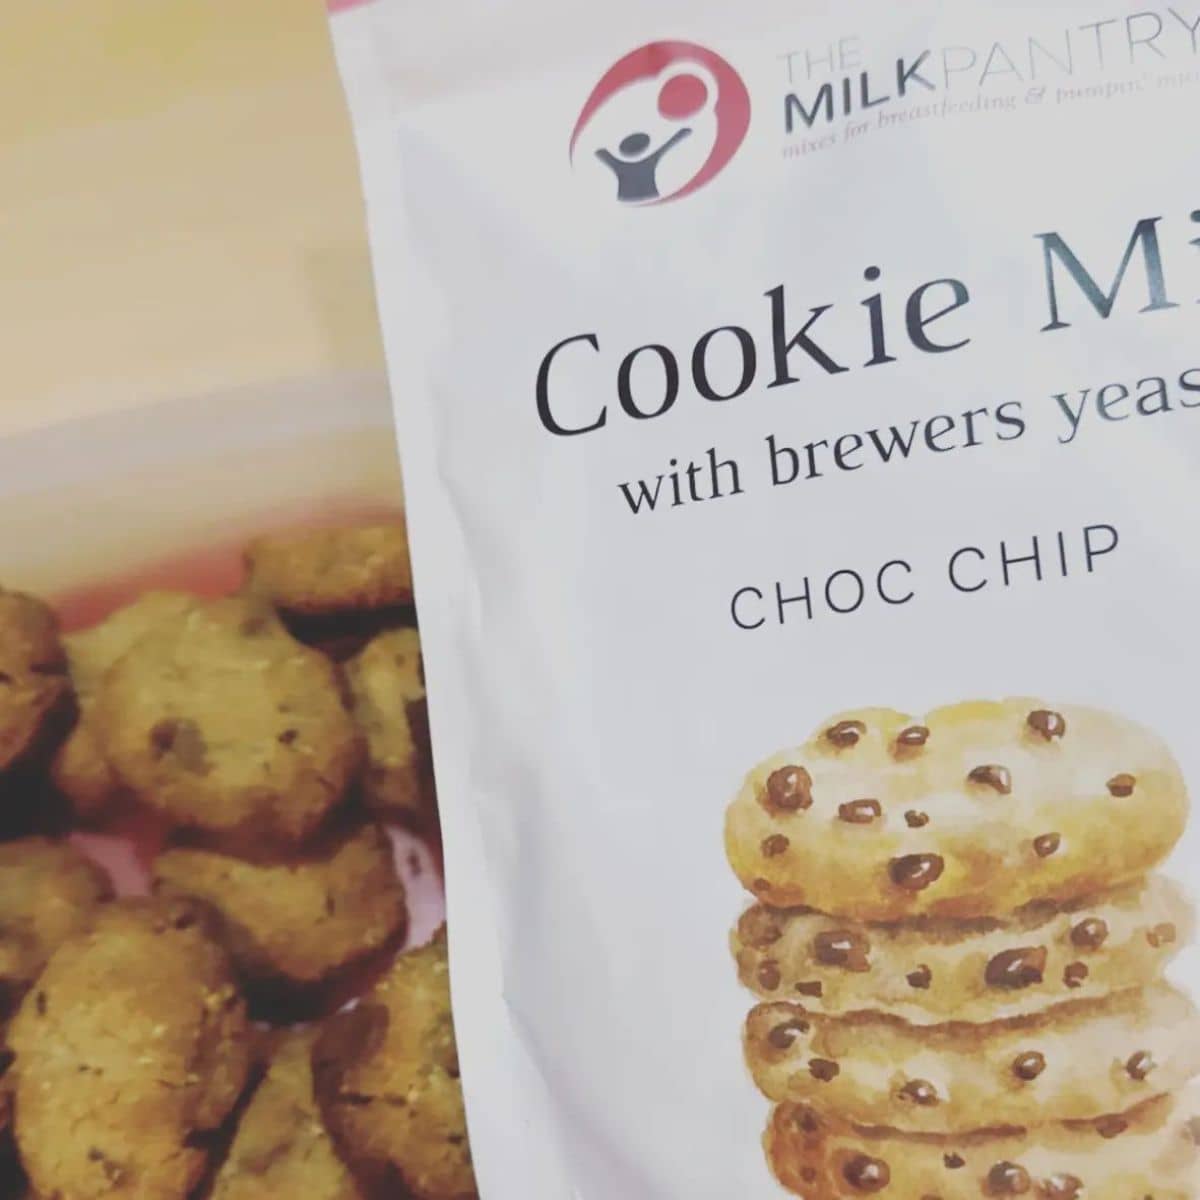 The Milk Pantry Cookie Mix - Choc Chip